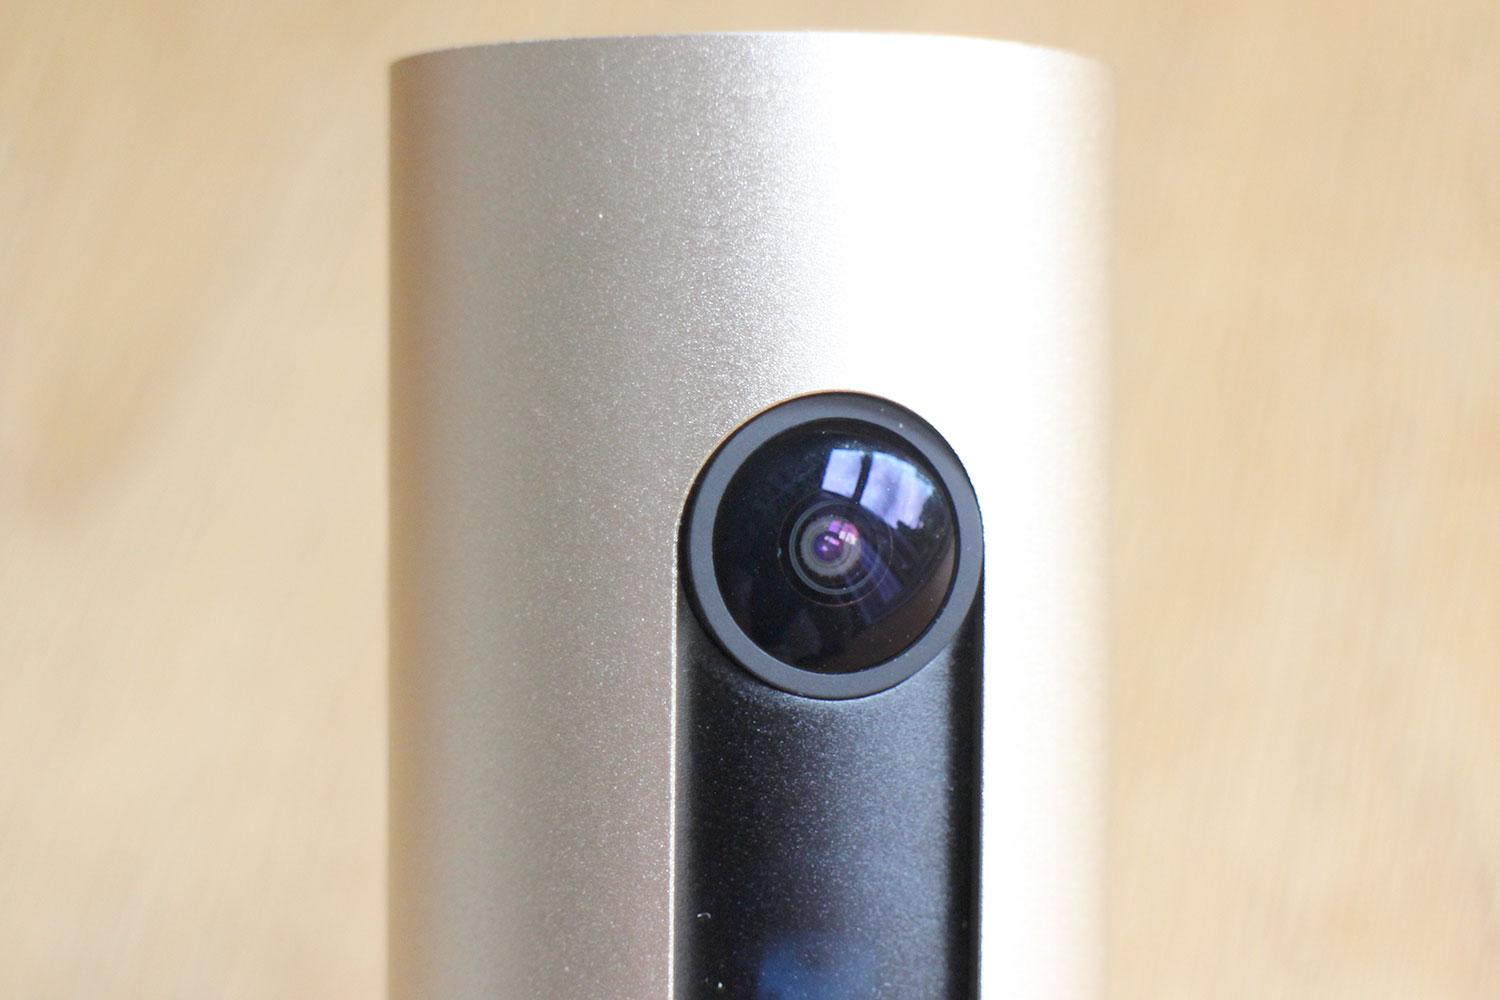 Netatmo Welcome Review - Nest Cam's Face-Recognizing Rival - SlashGear